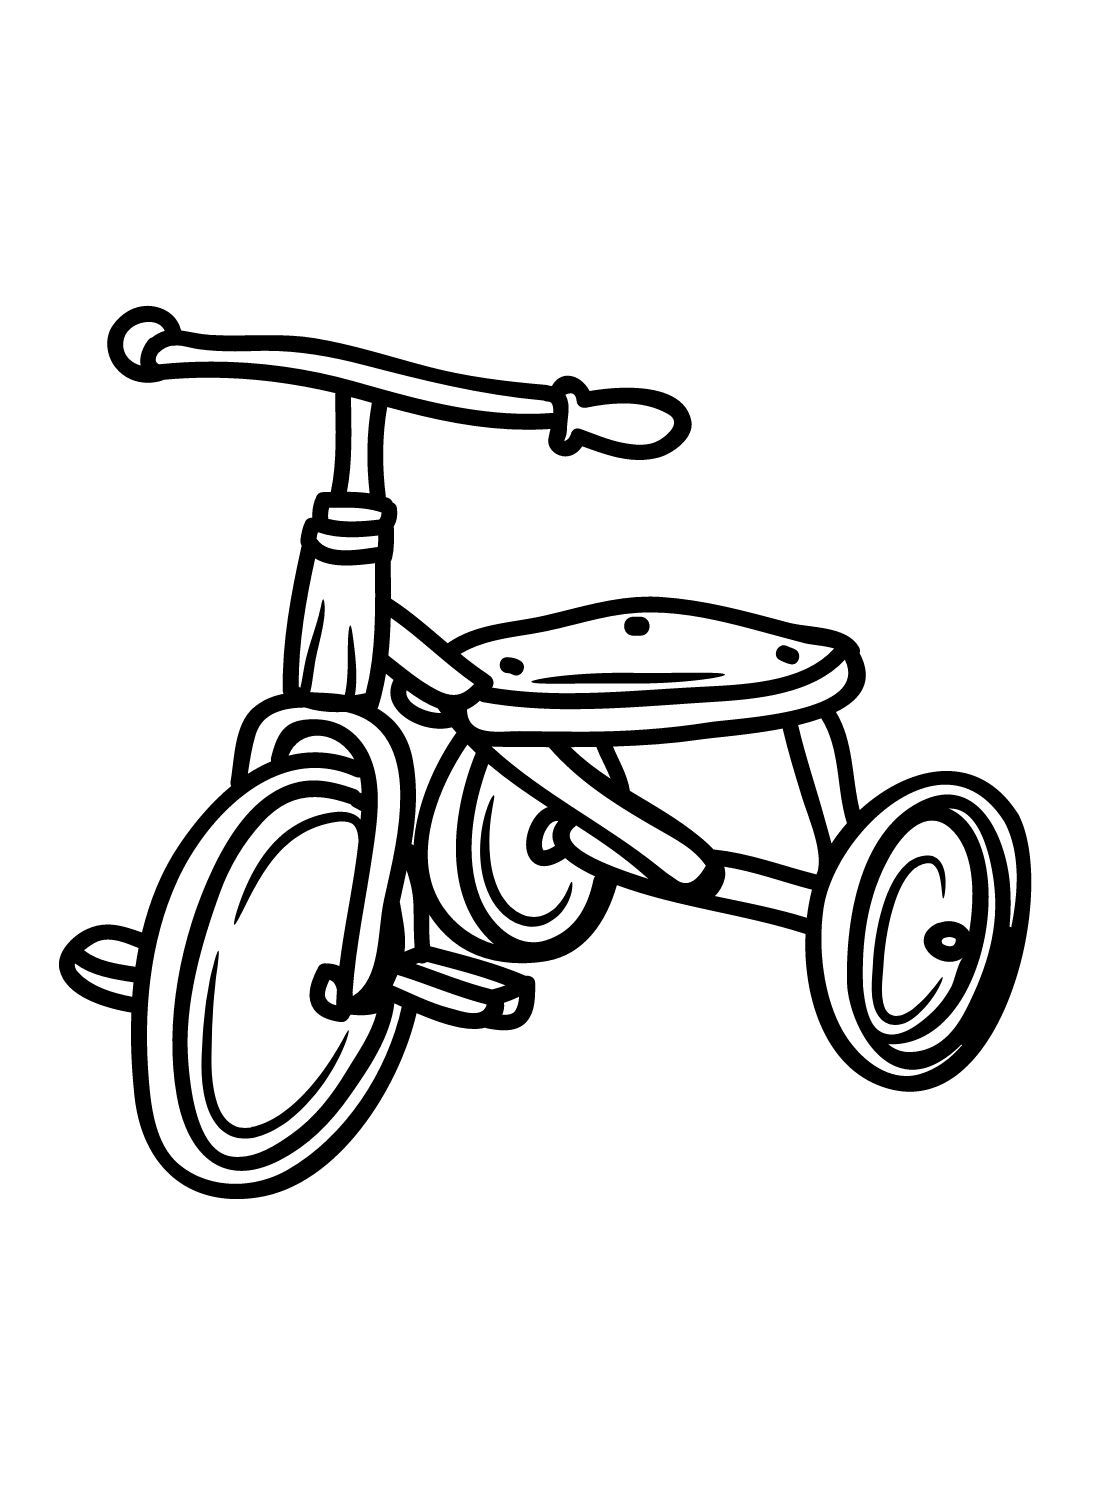 Bicycle for Kids from Bicycle